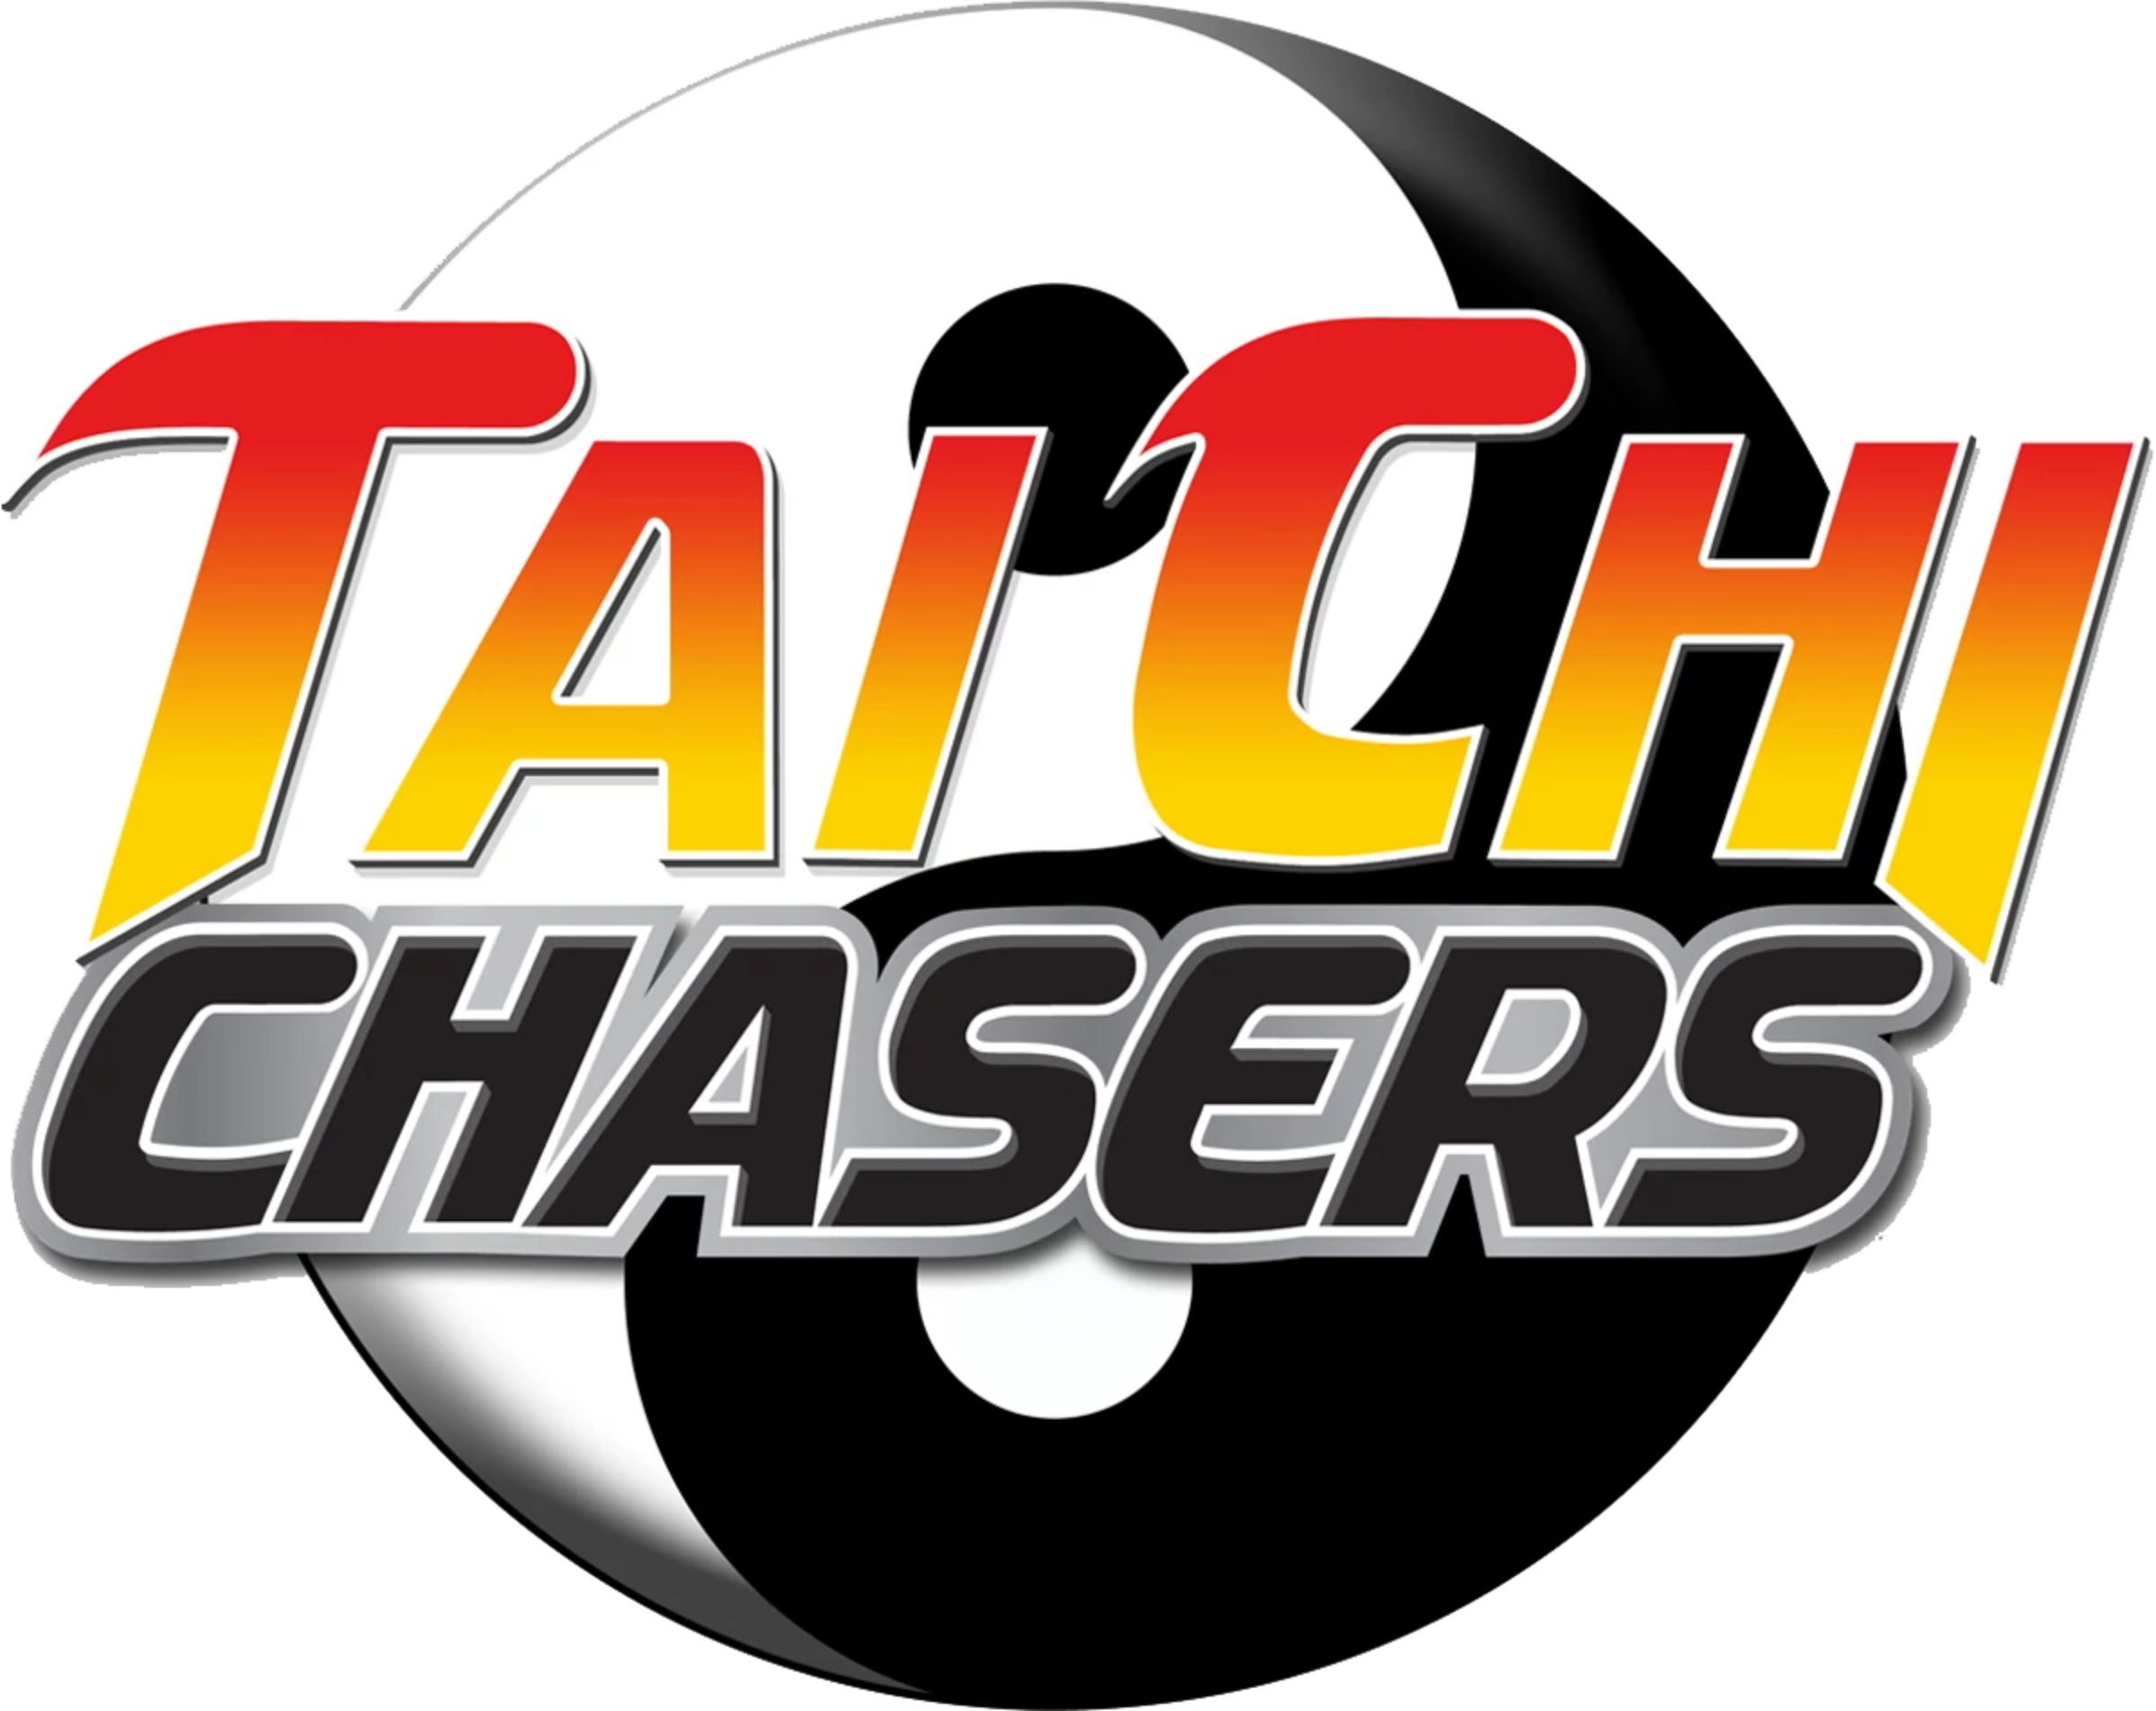 Tai Chi Chasers Complete (3 DVDs Box Set)